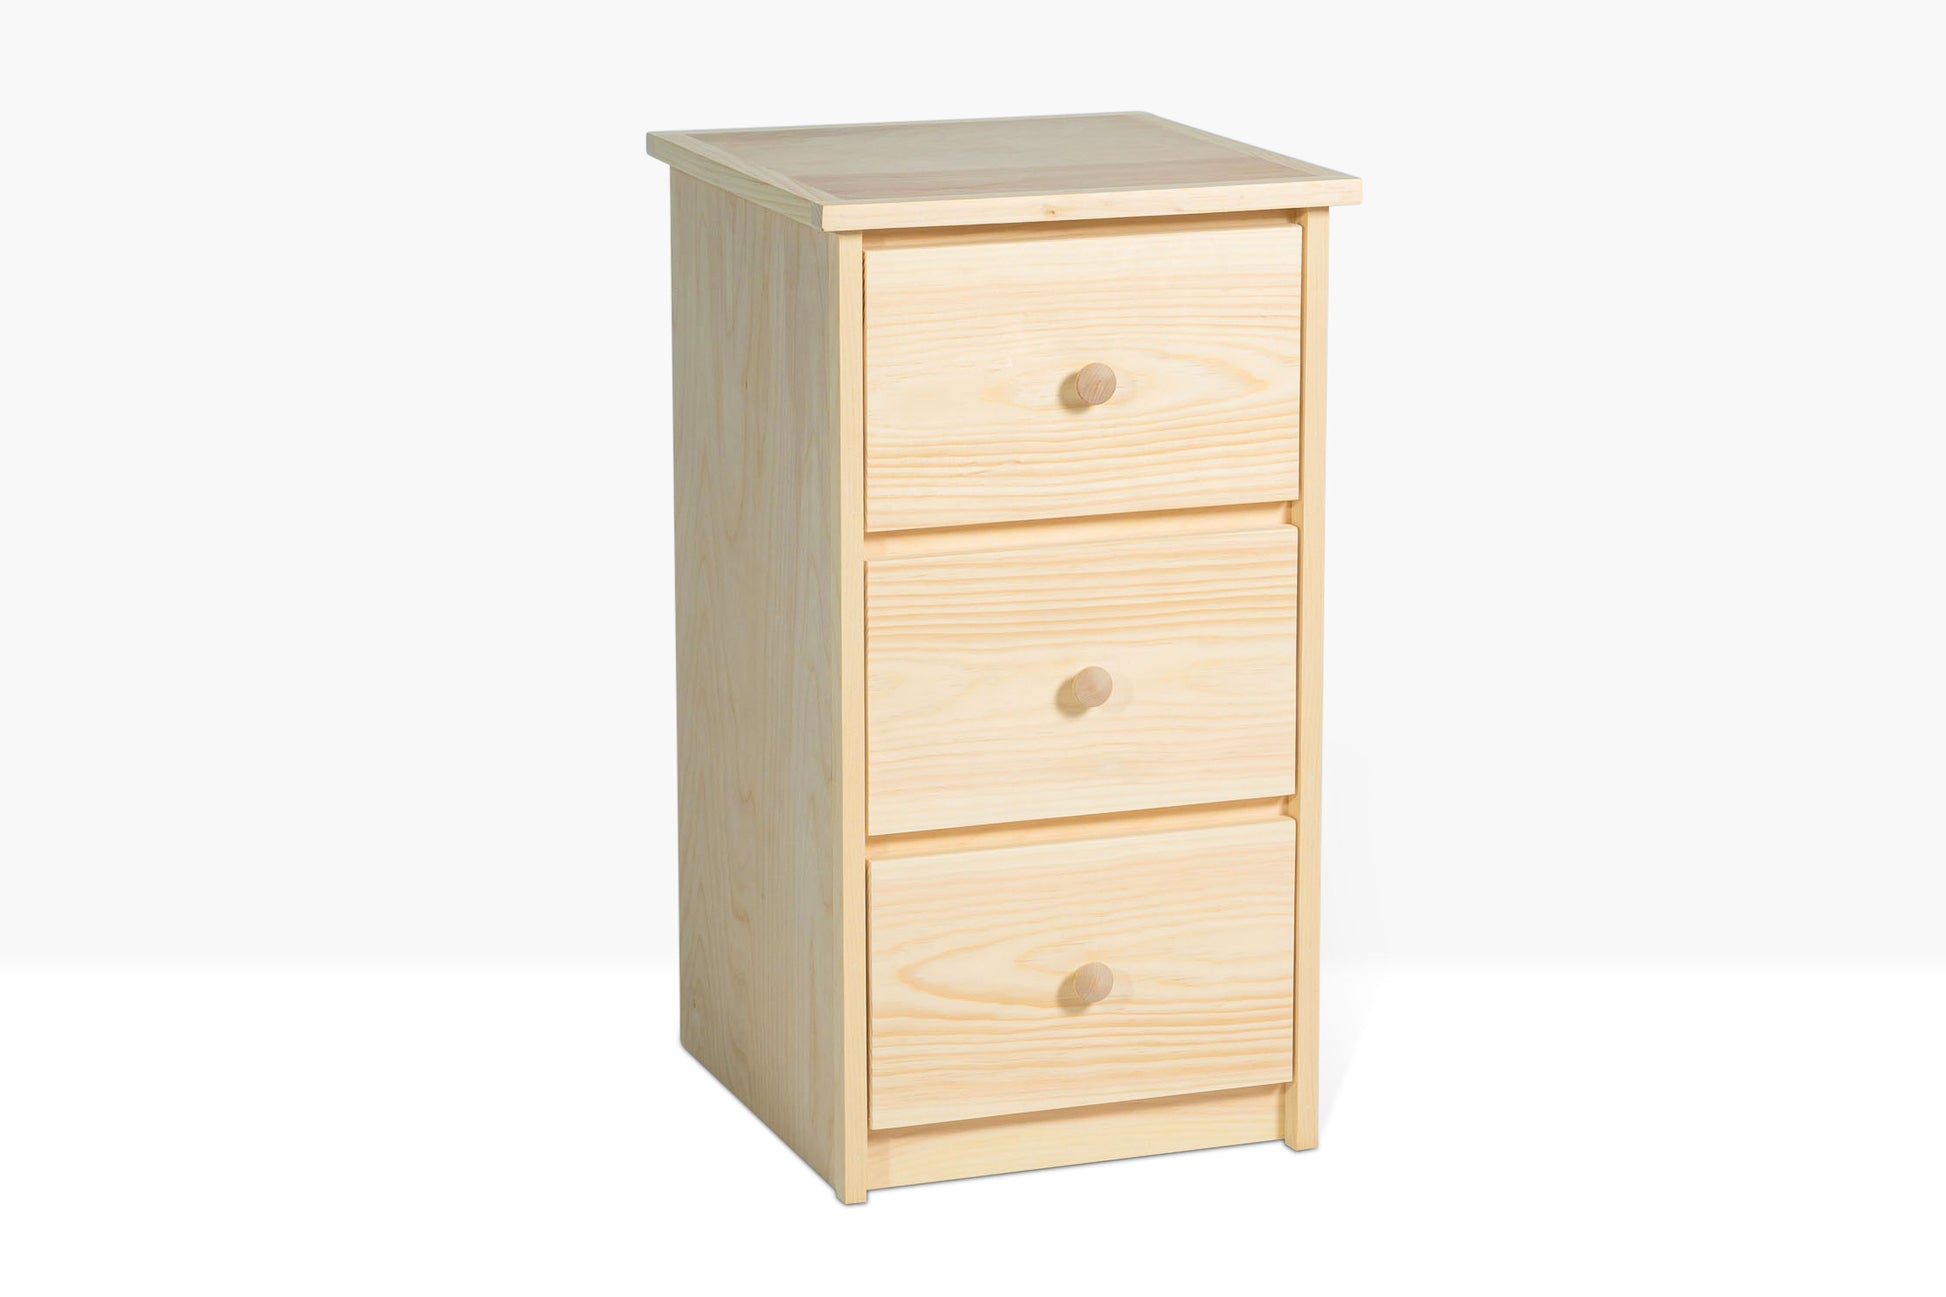 Evergreen Three Drawer Nightstand shown from side angle to show details of pine construction. Shown unfinished.